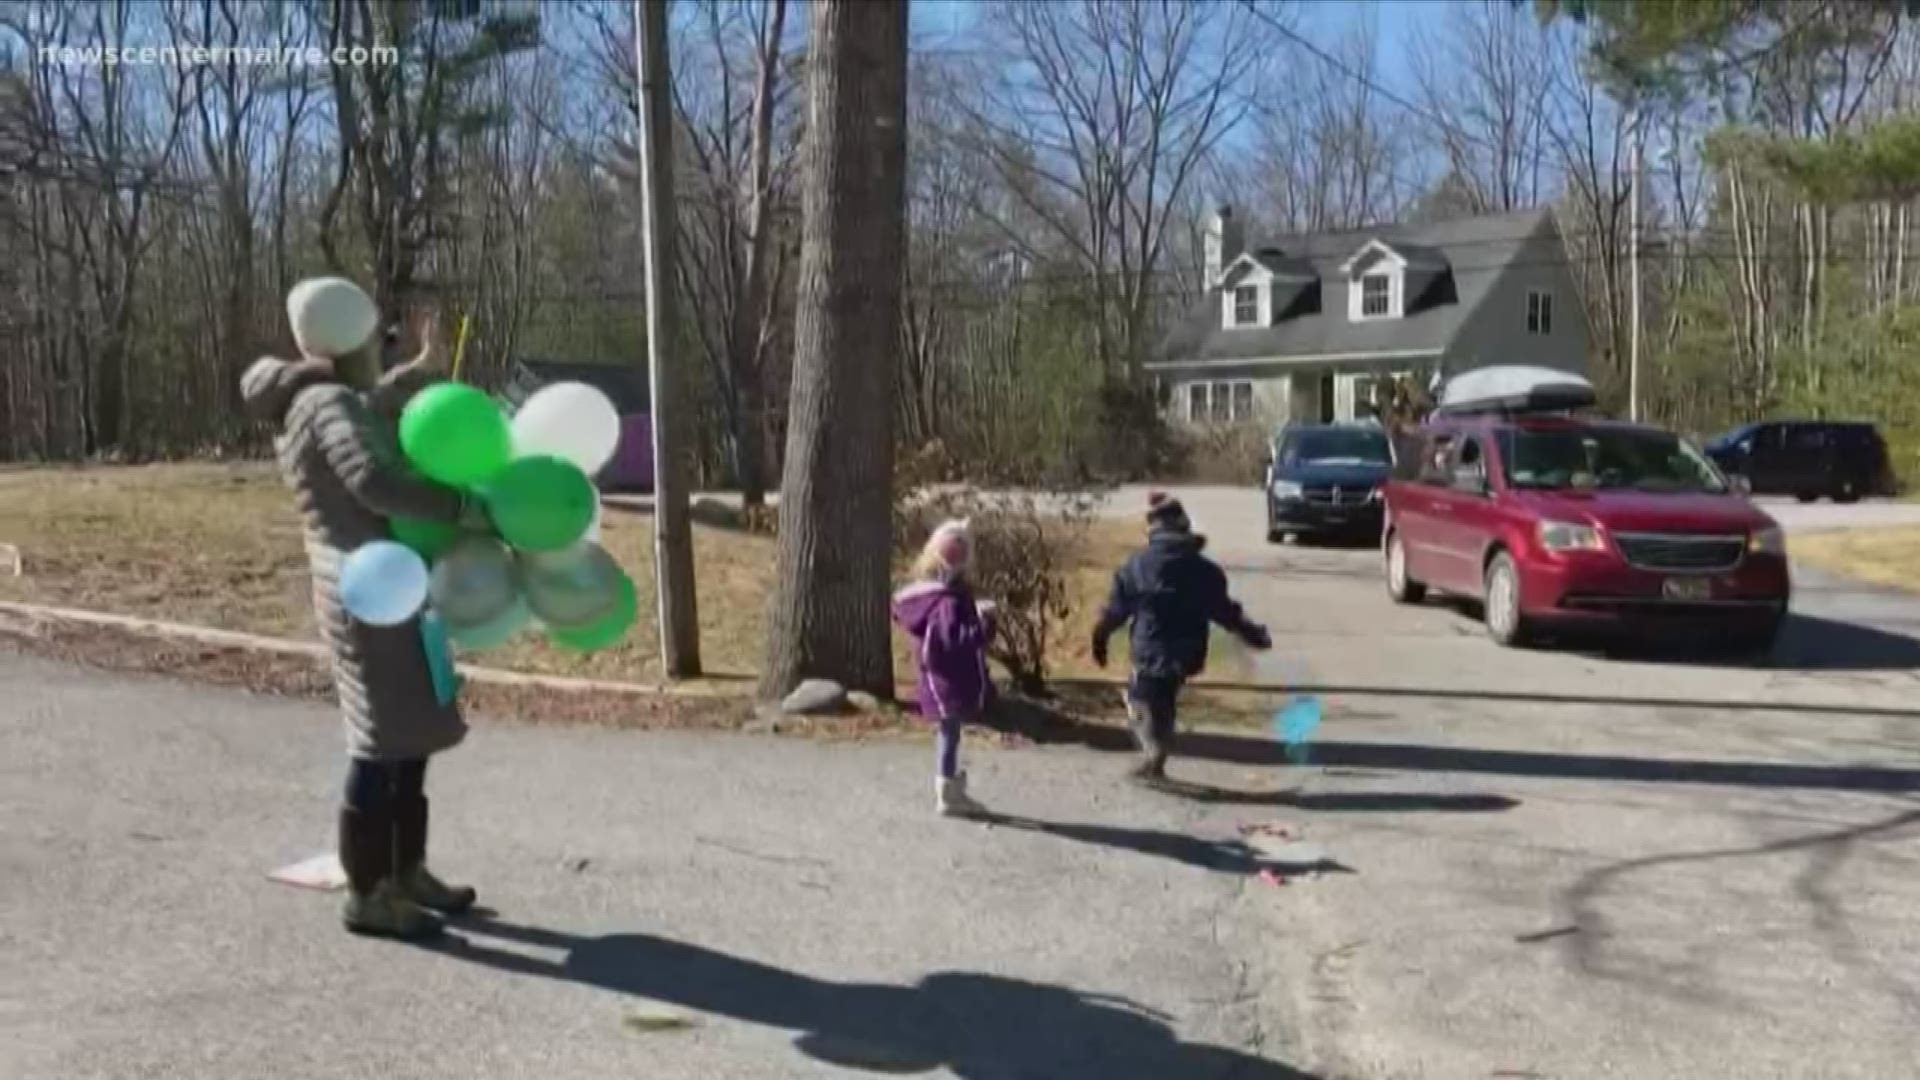 In Kennebunk, the community is coming together to help celebrate birthdays all while continuing to practice social distancing.